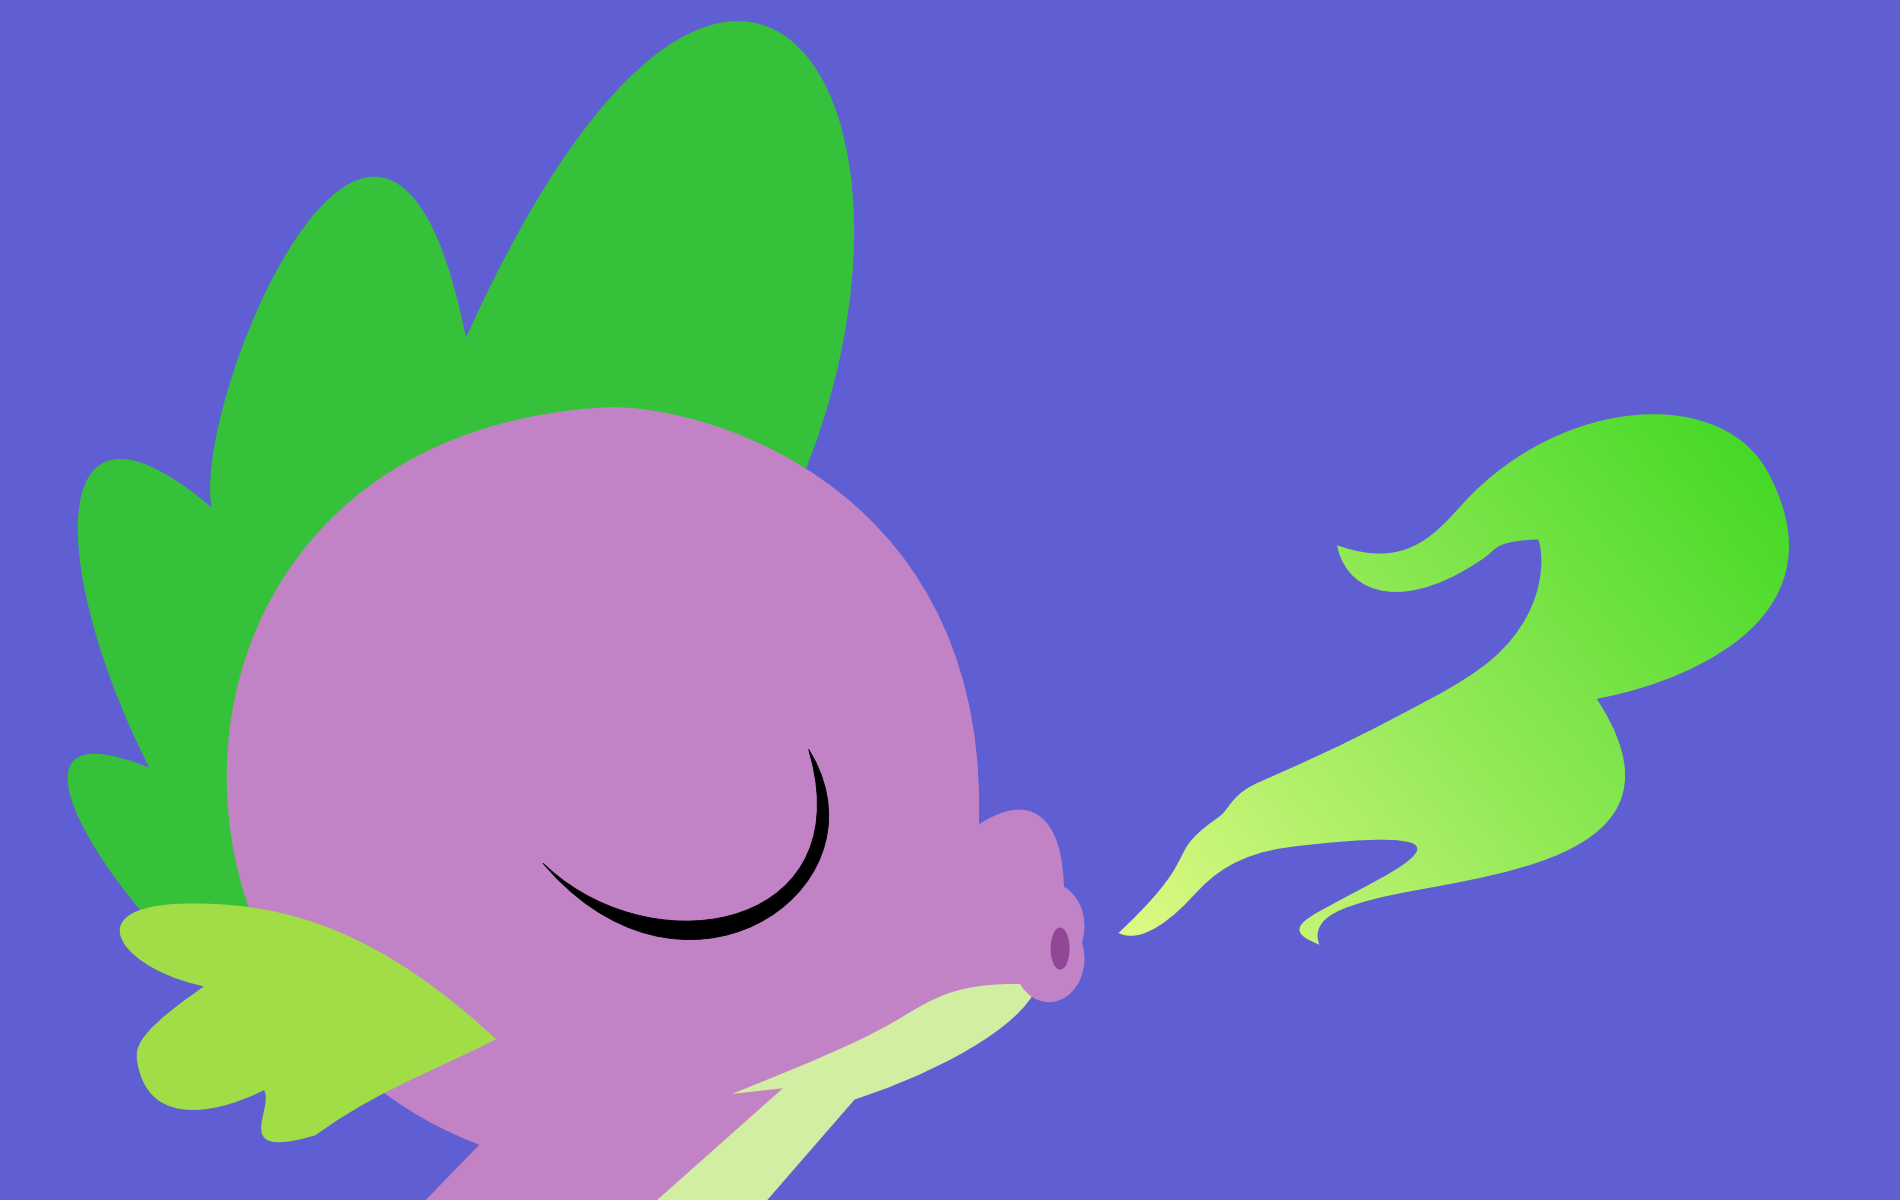 Minimalist spike by Death-of-all